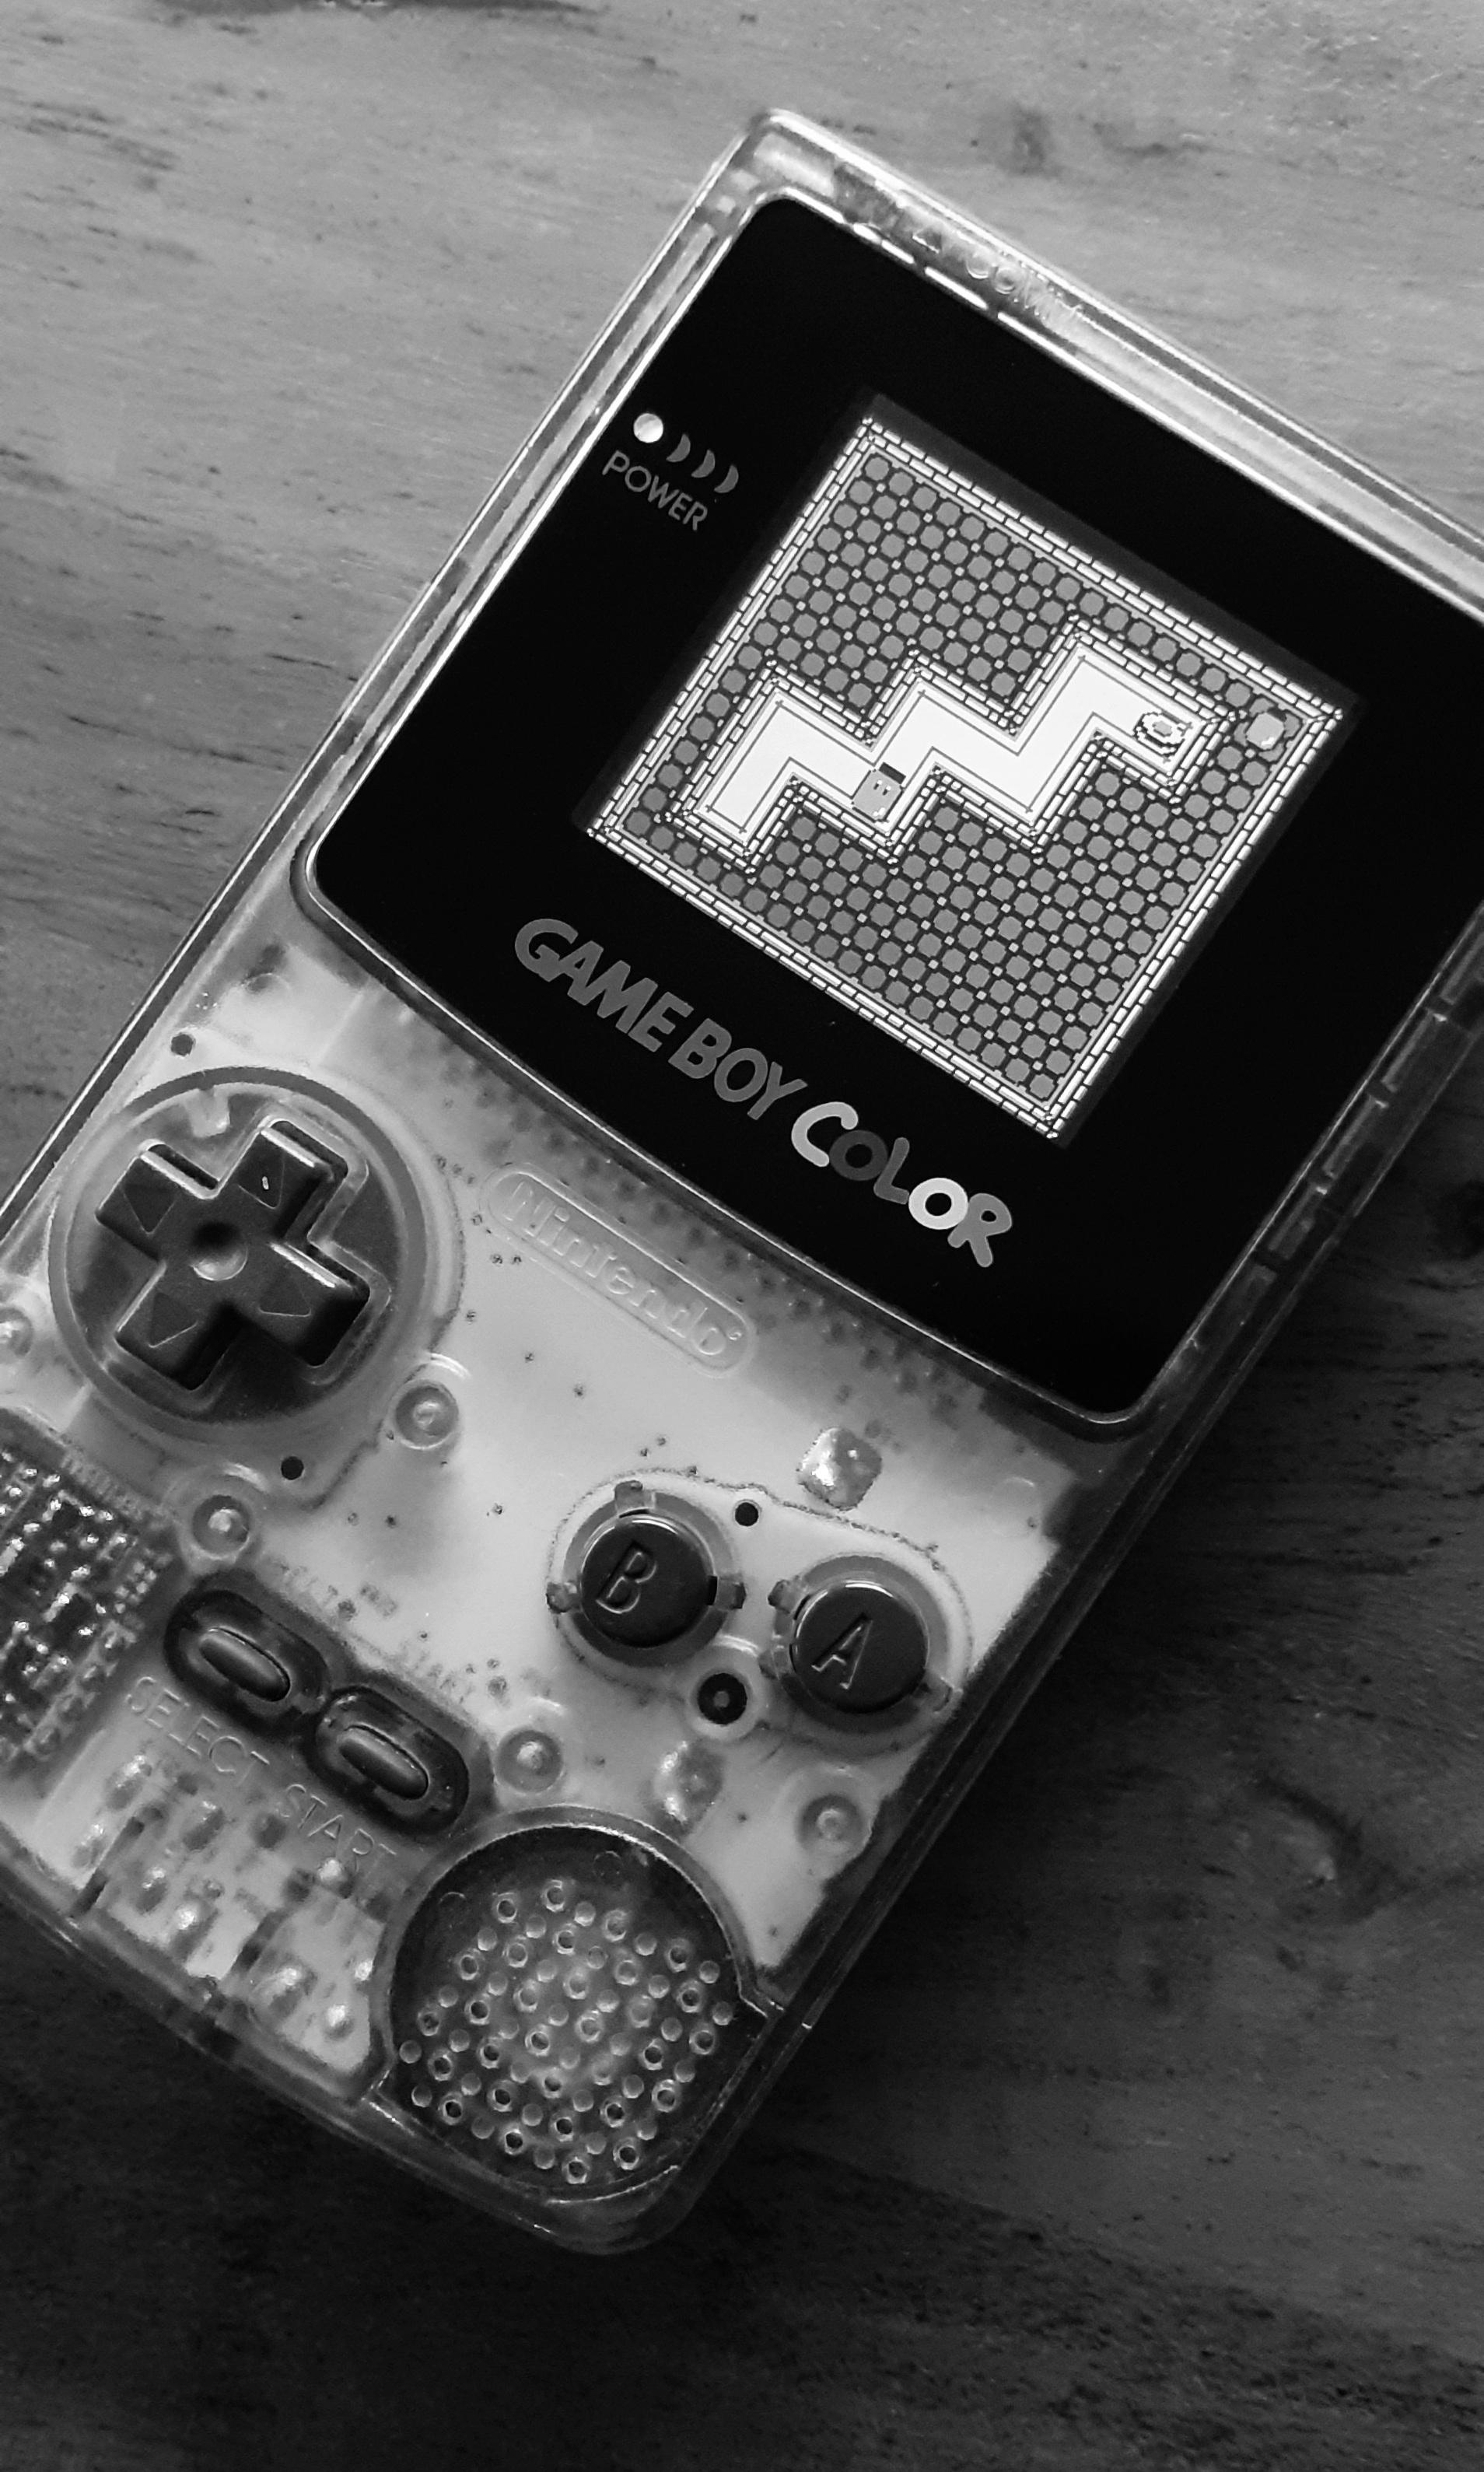 A Nintendo Gameboy Color in black and white. - Game Boy